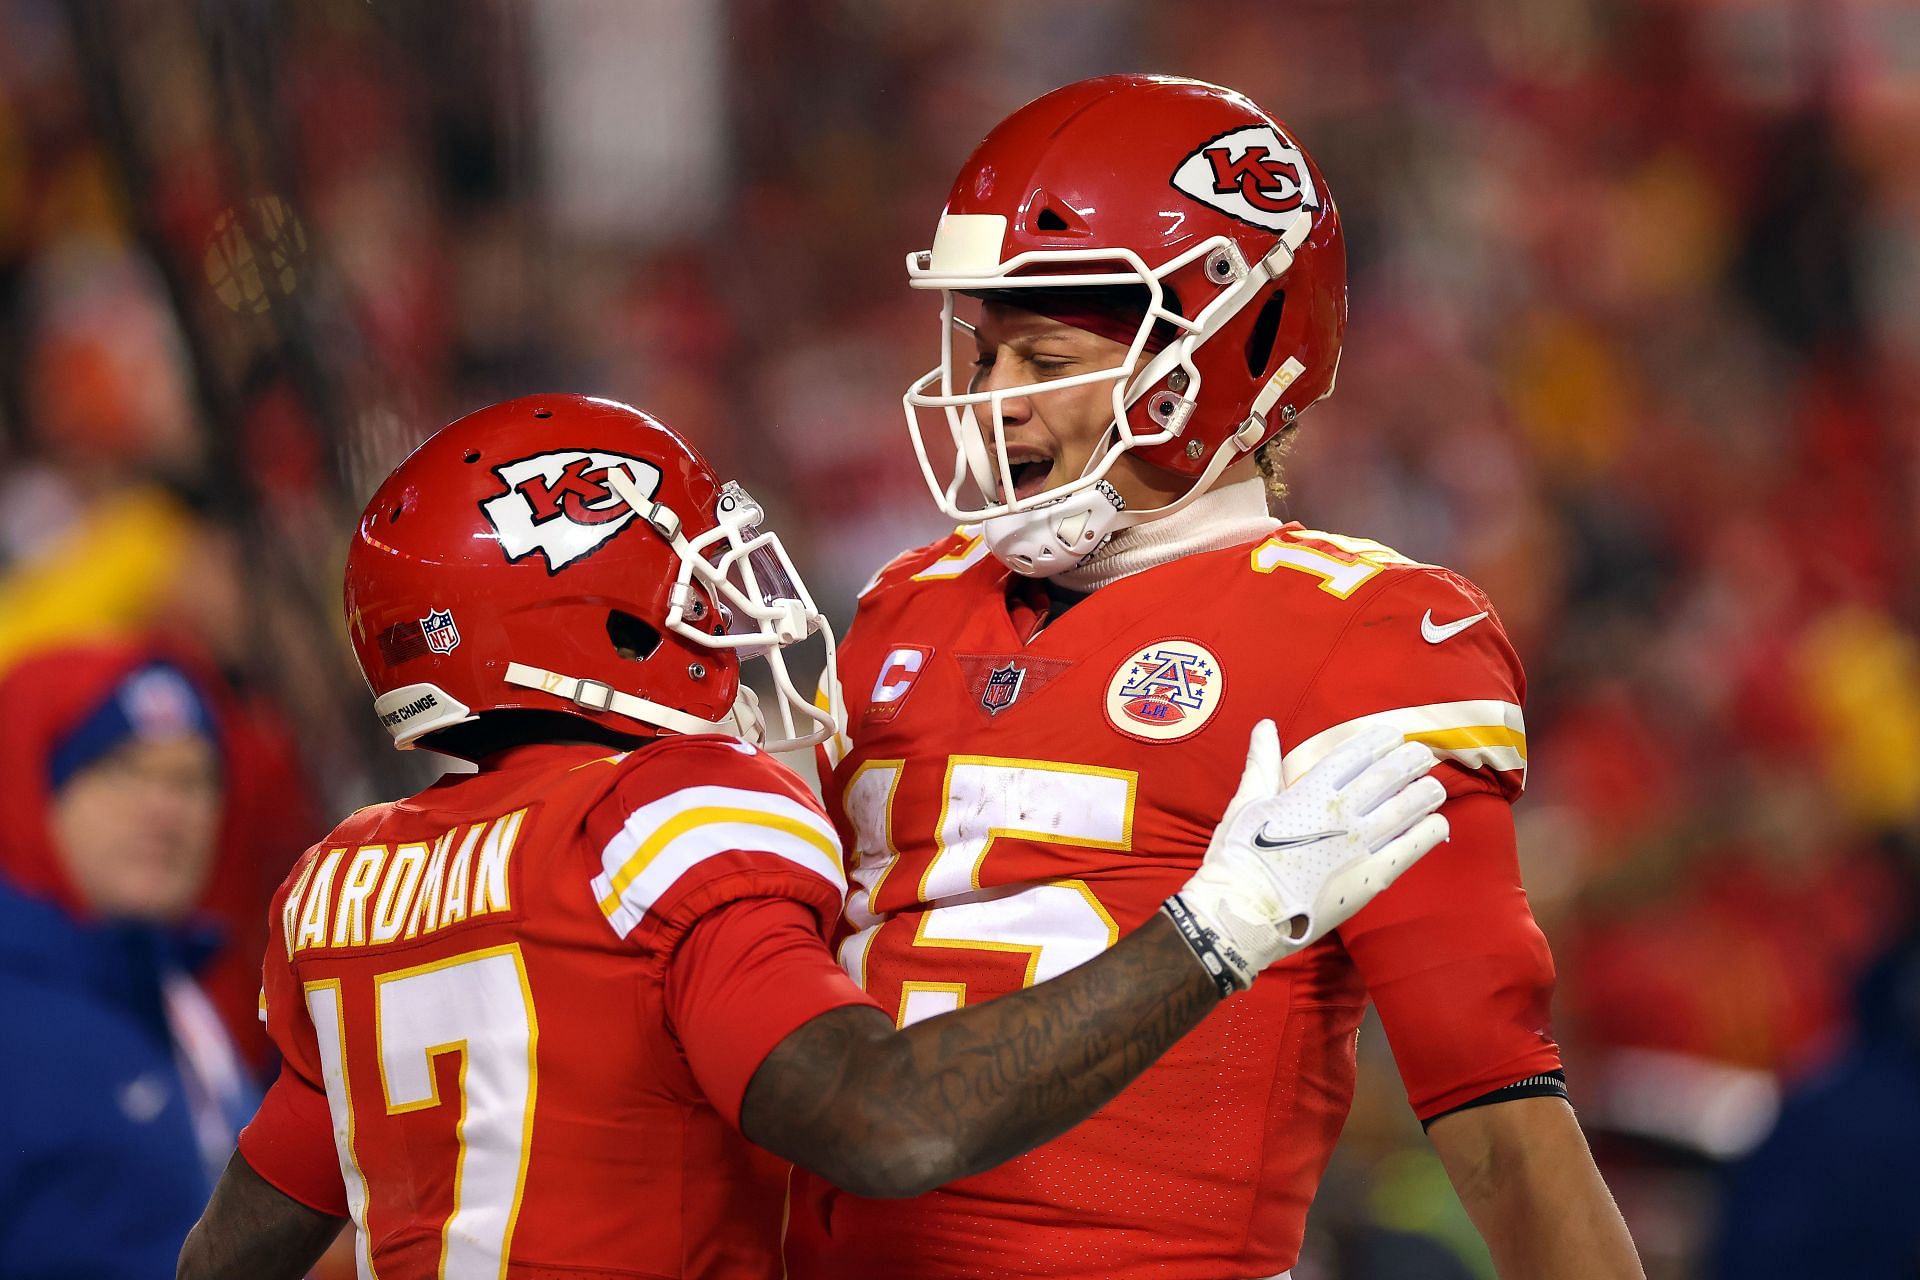 The Chiefs should also remain a top NFL team